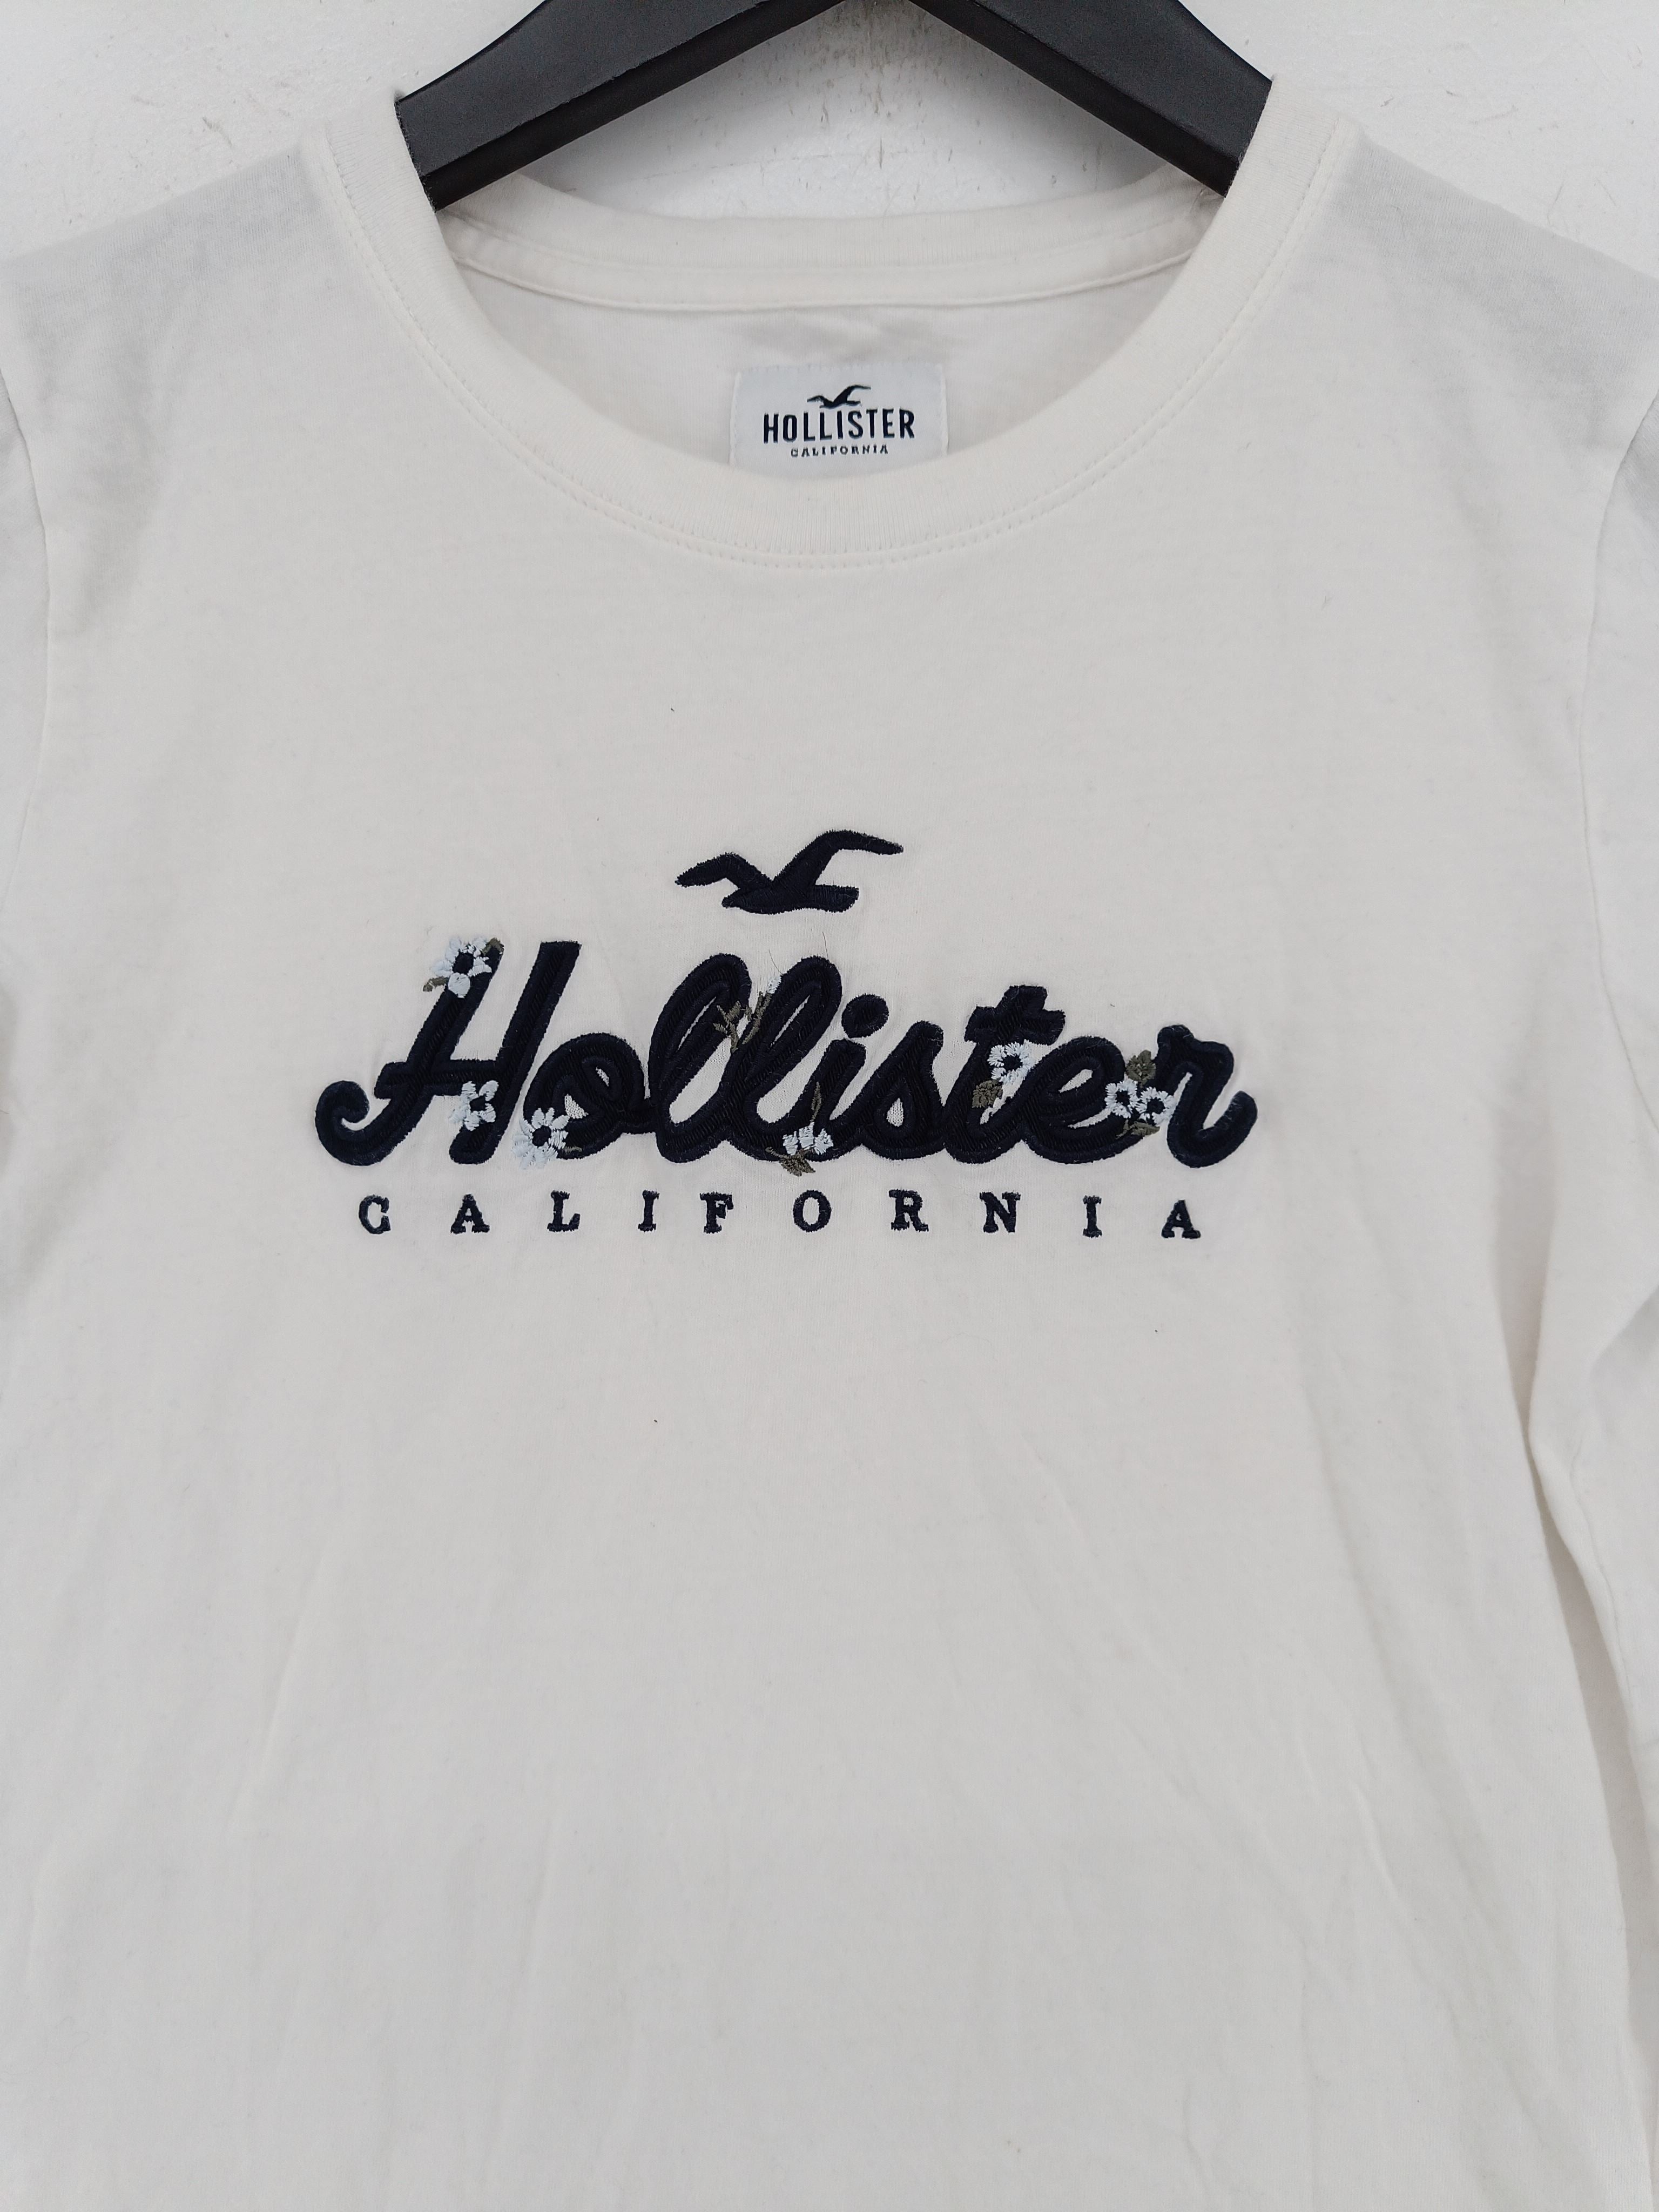 HOLLISTER Girls Graphic T-Shirt Top 10-11 Years Medium White Cotton, Vintage & Second-Hand Clothing Online